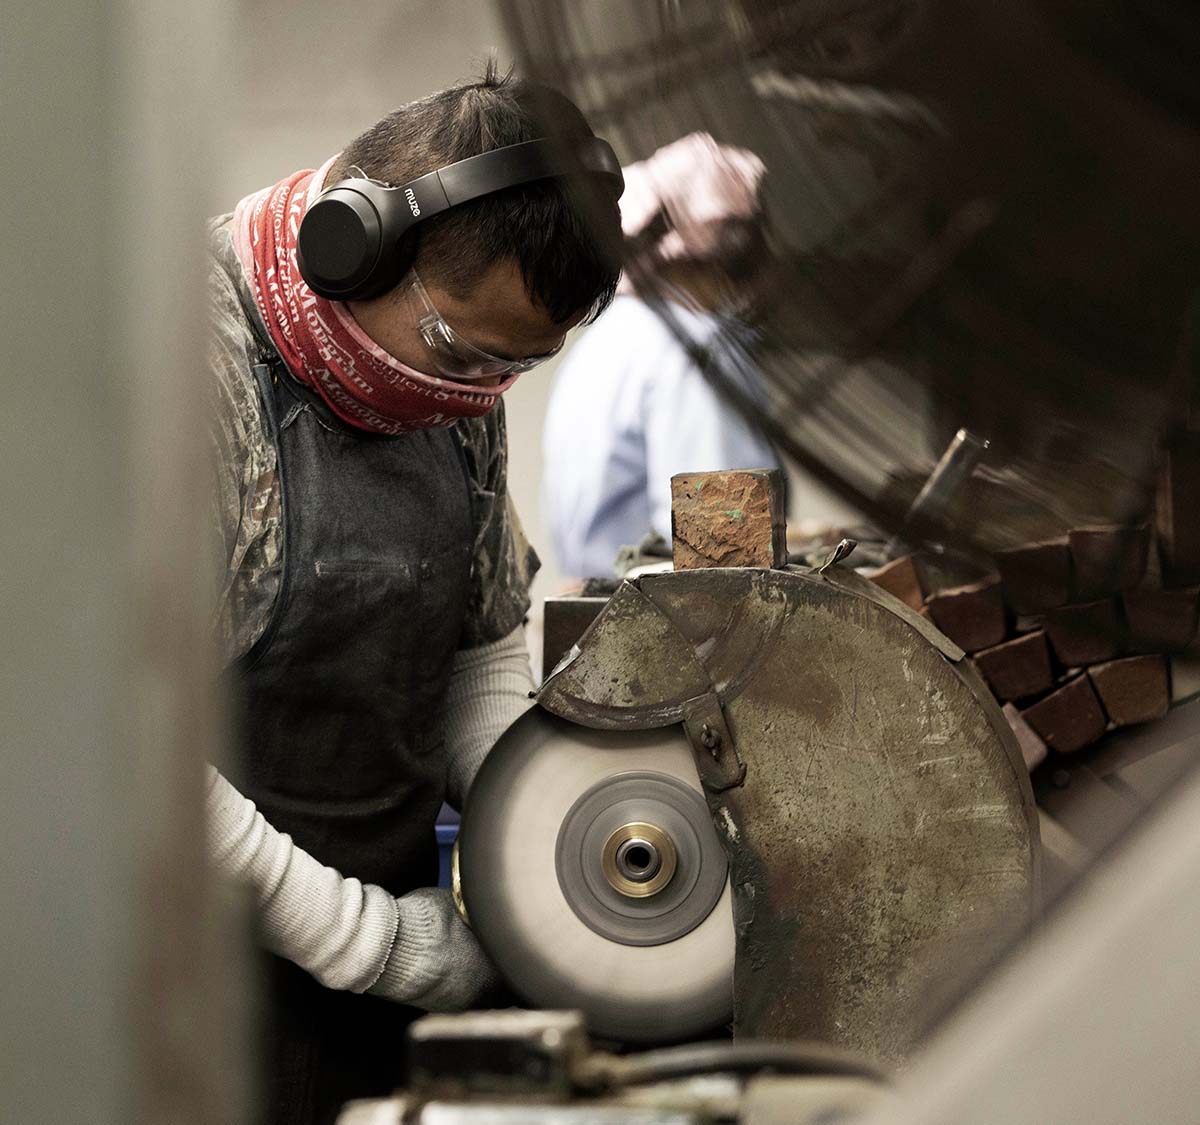 Employee working on the grinder